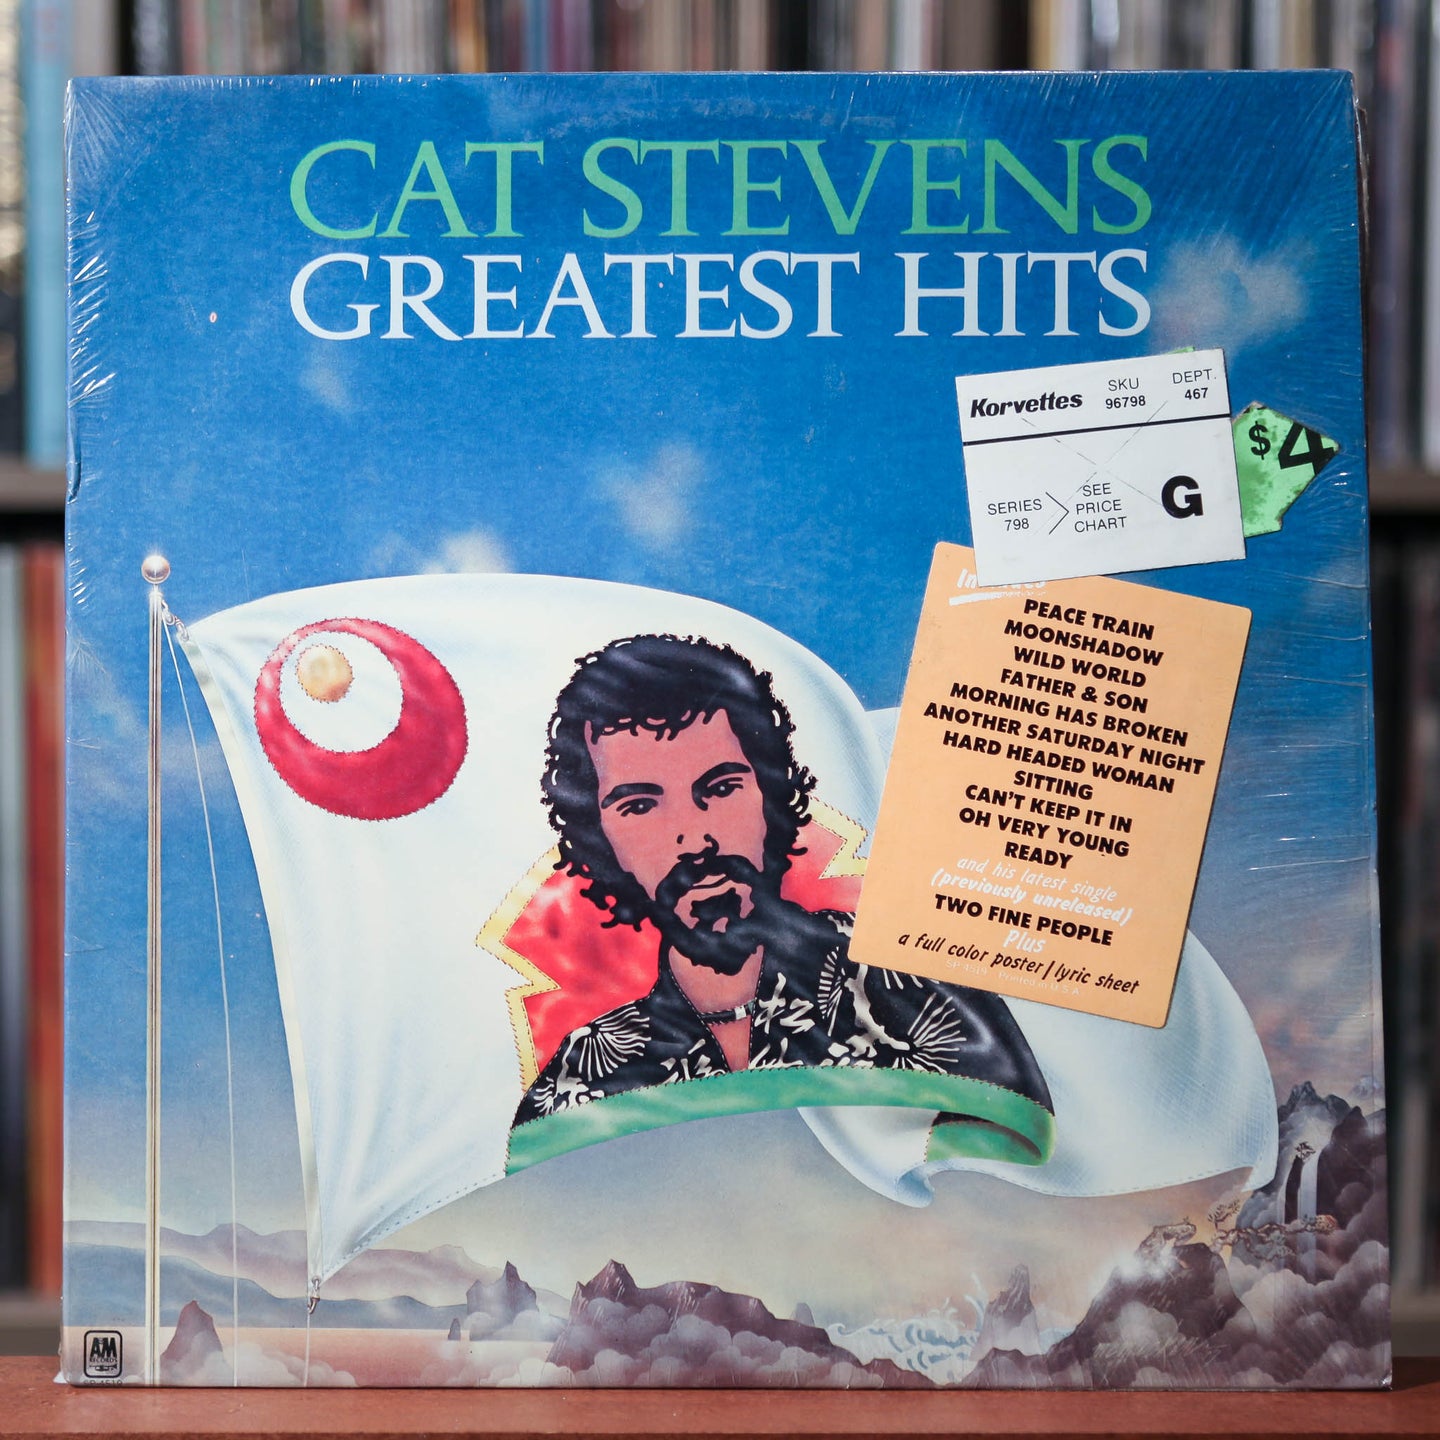 Cat Stevens - Greatest Hits -1972 A&M, EX/VG+ w/Shrink and Hype